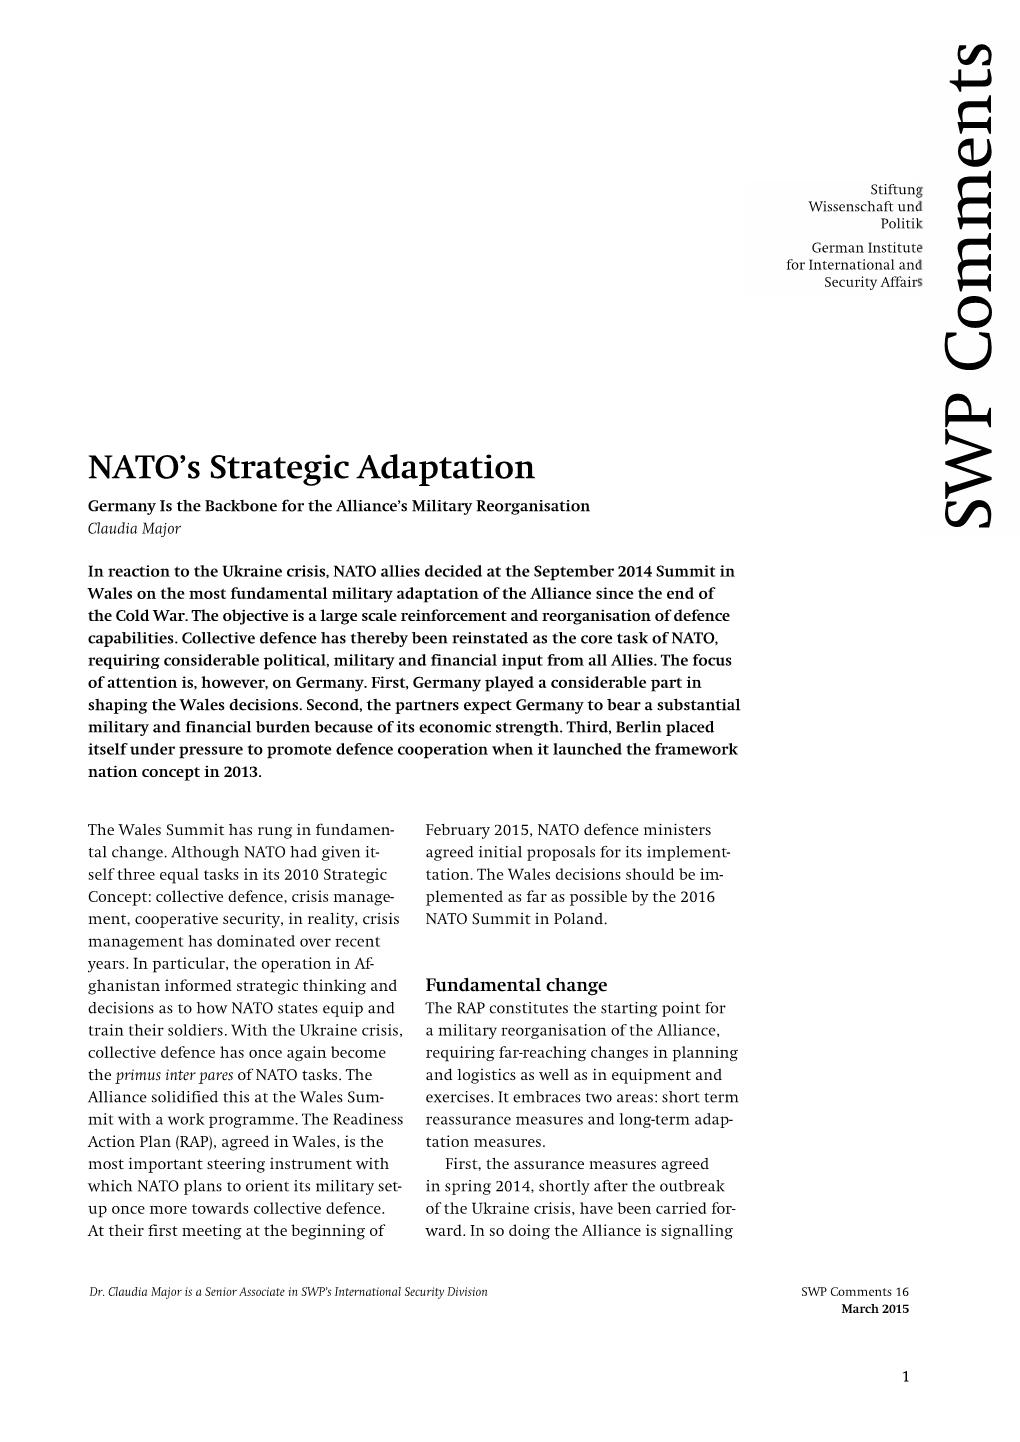 NATO's Strategic Adaptation. Germany Is the Backbone for The